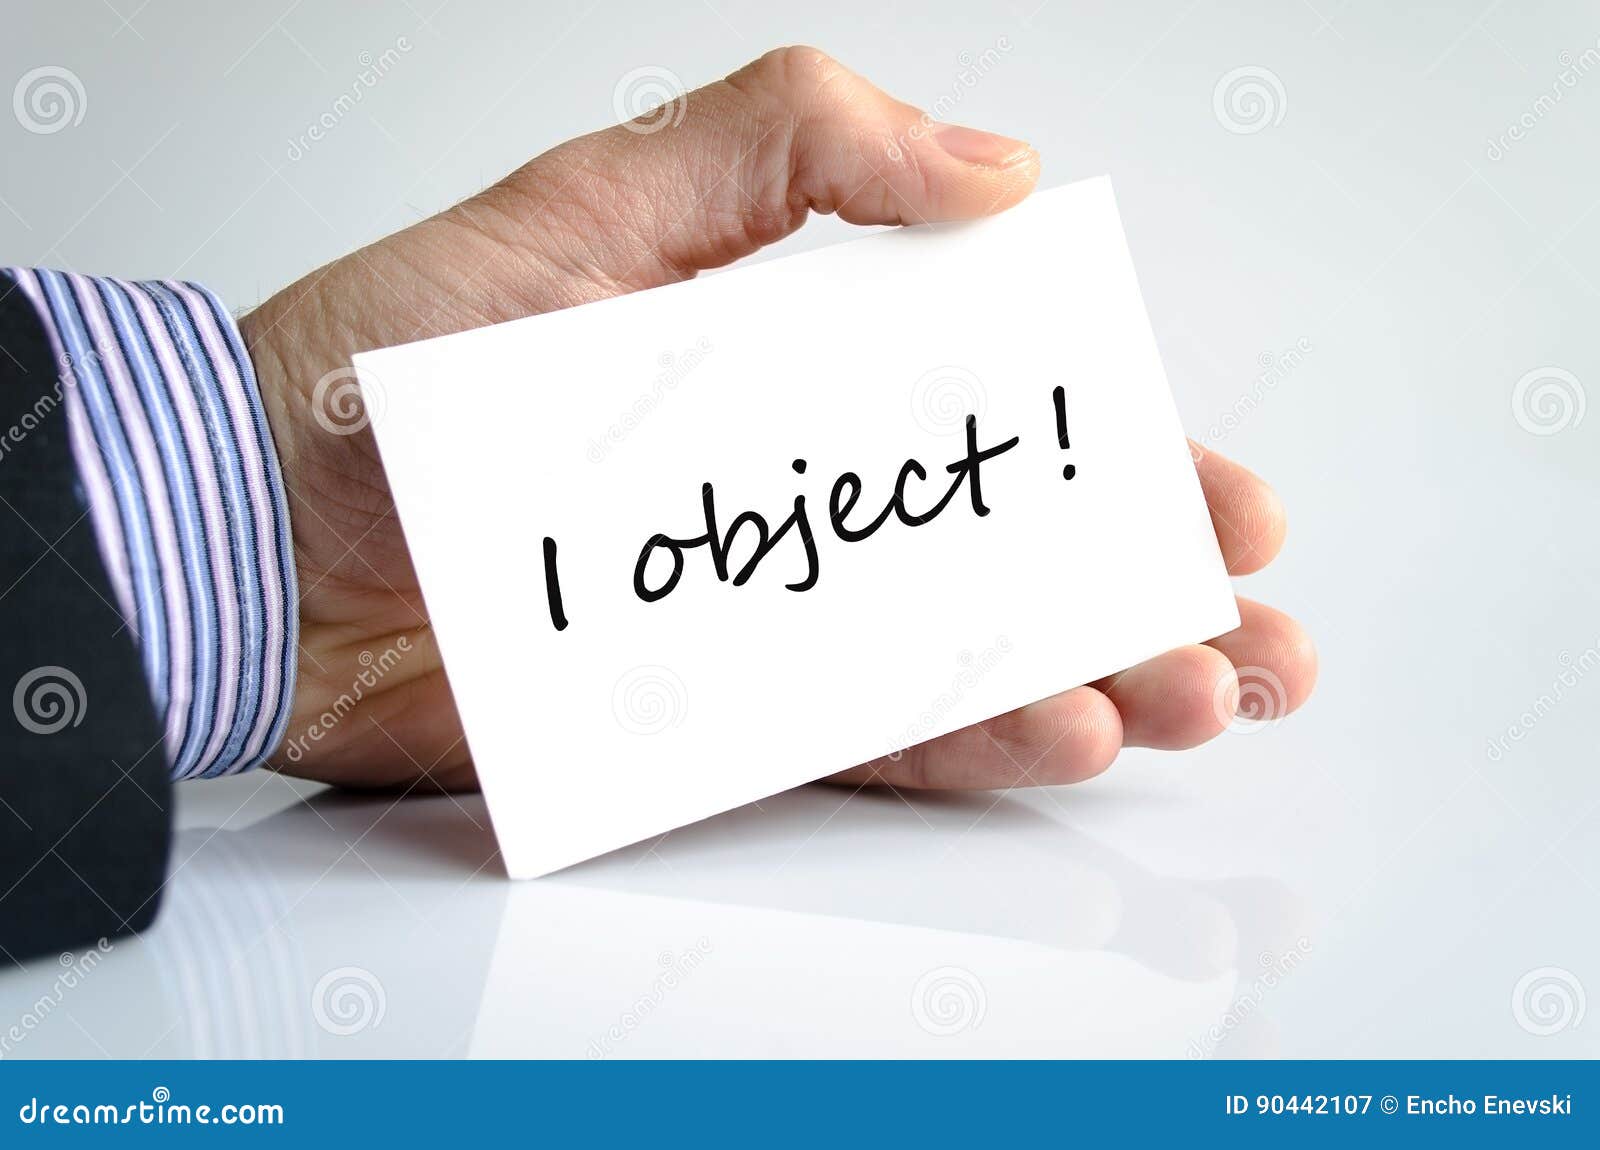 i object concept